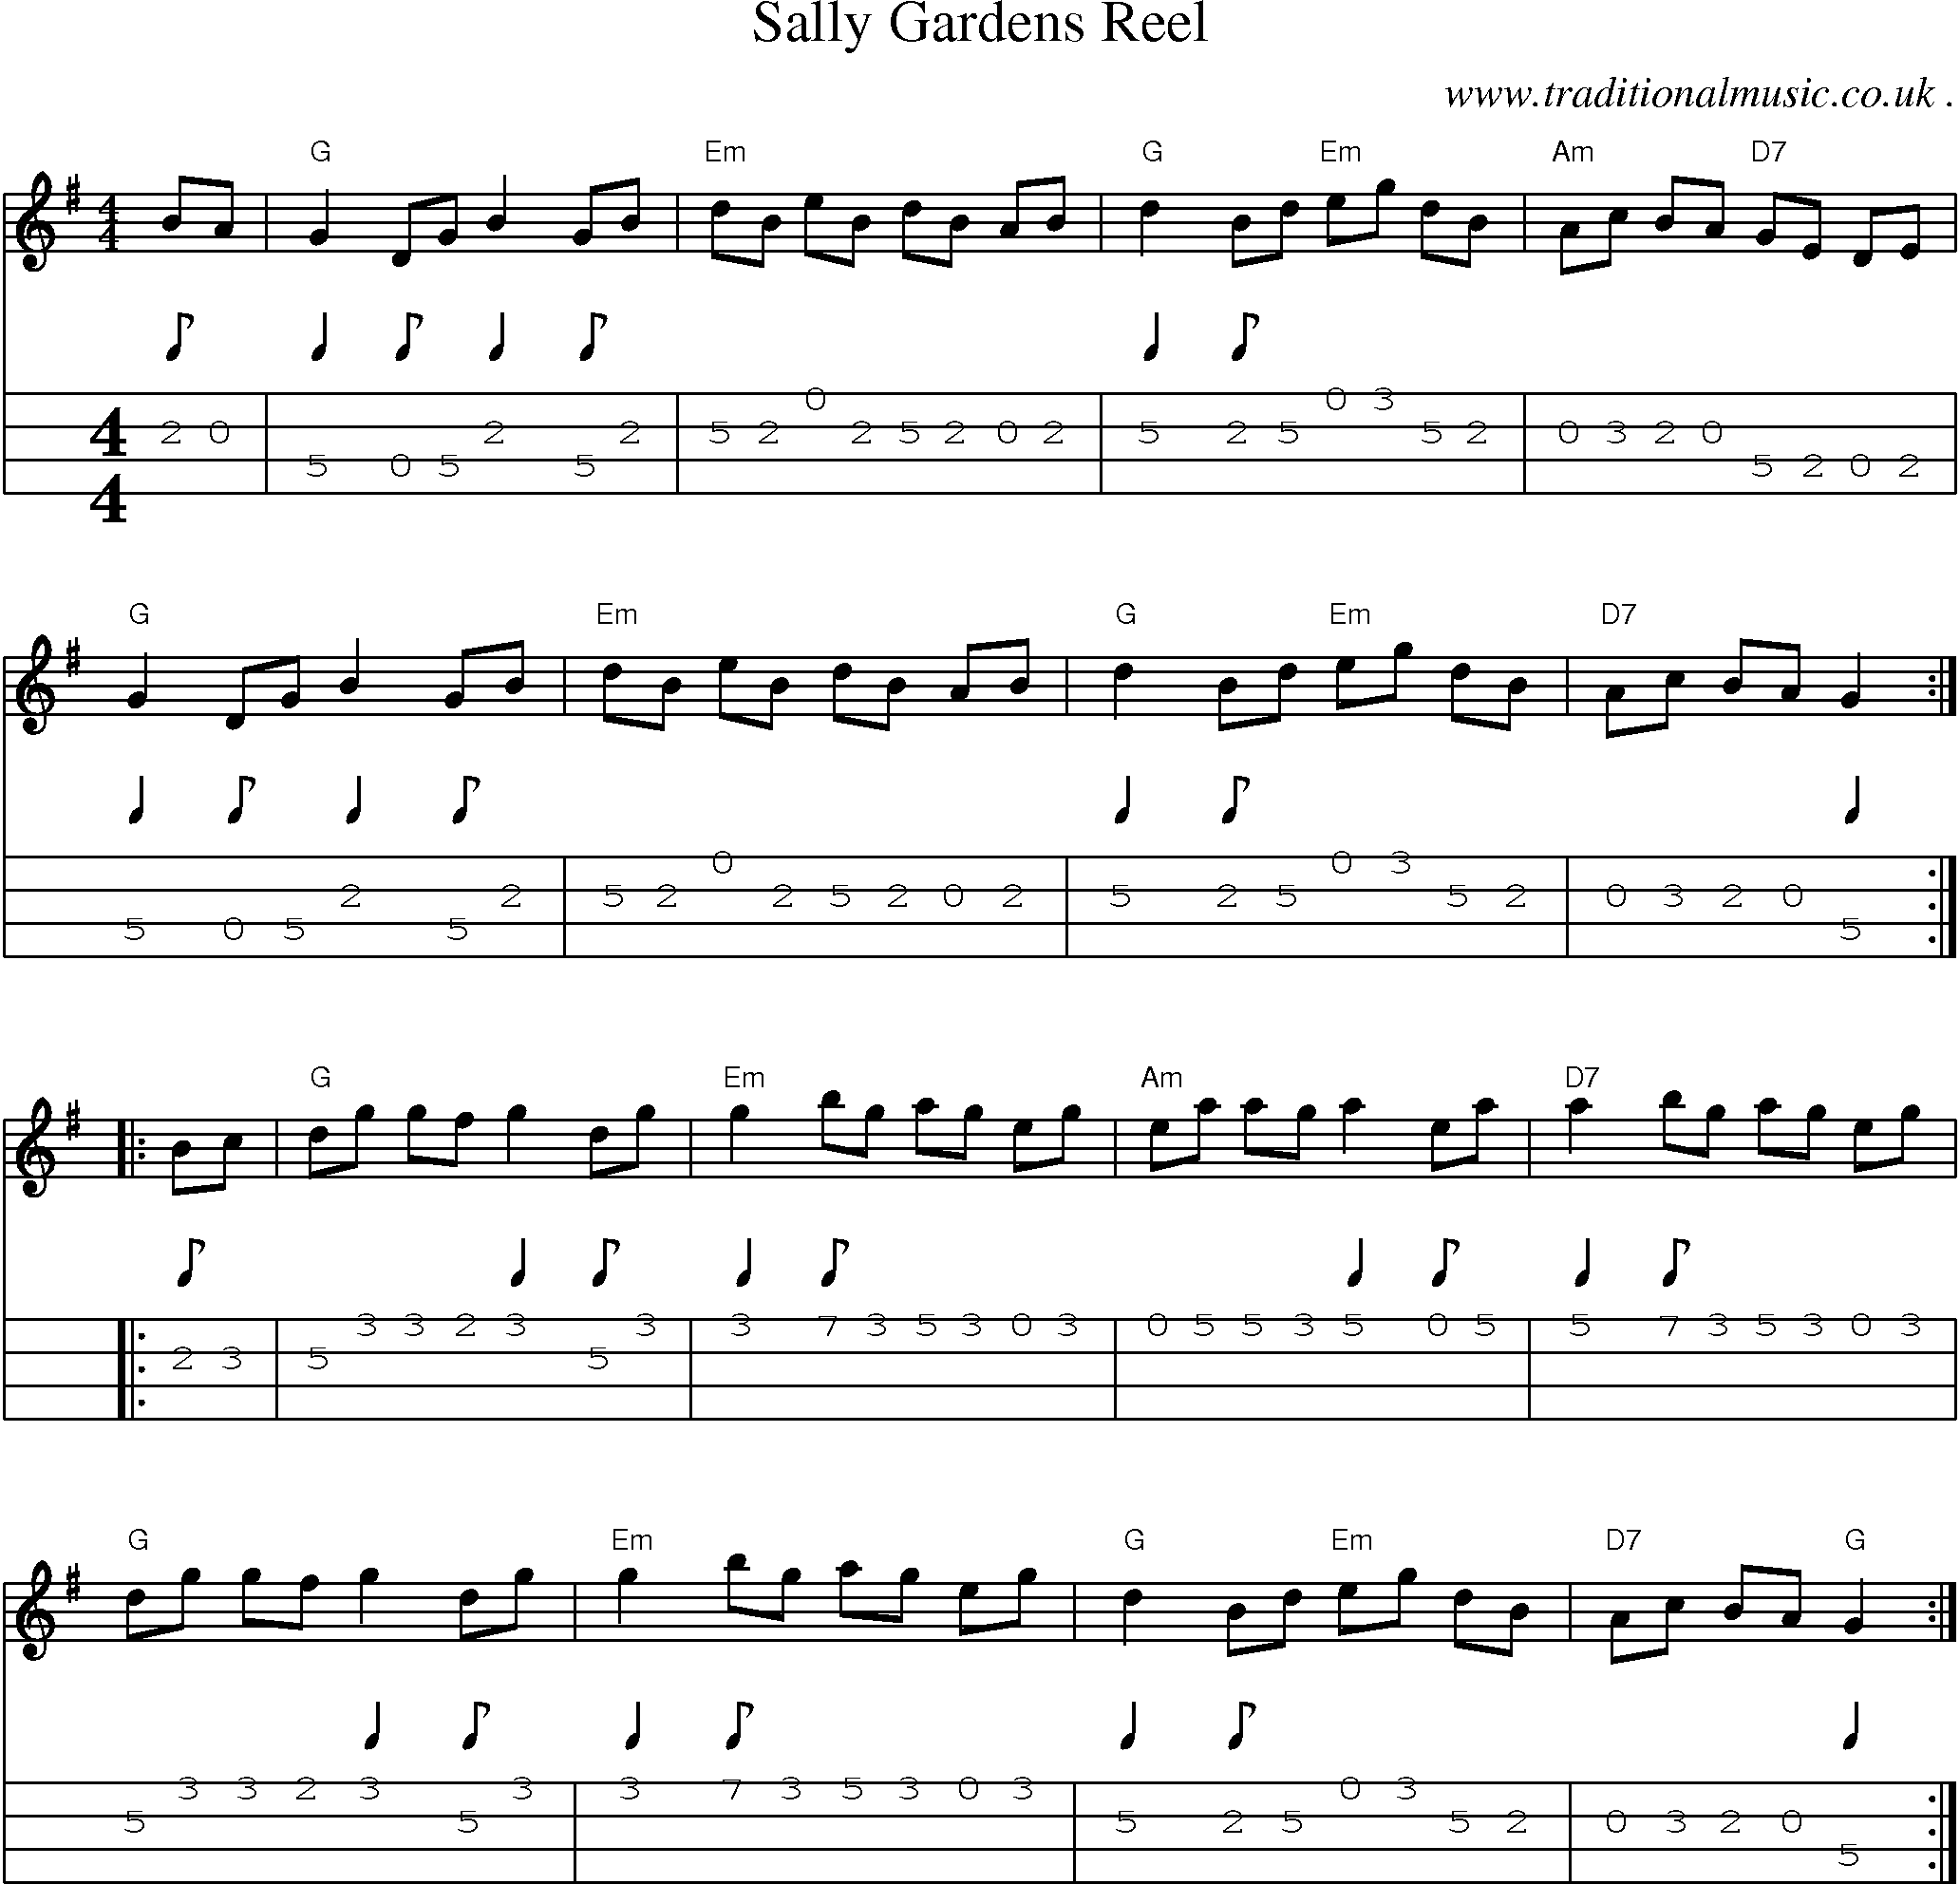 Music Score and Guitar Tabs for Sally Gardens Reel